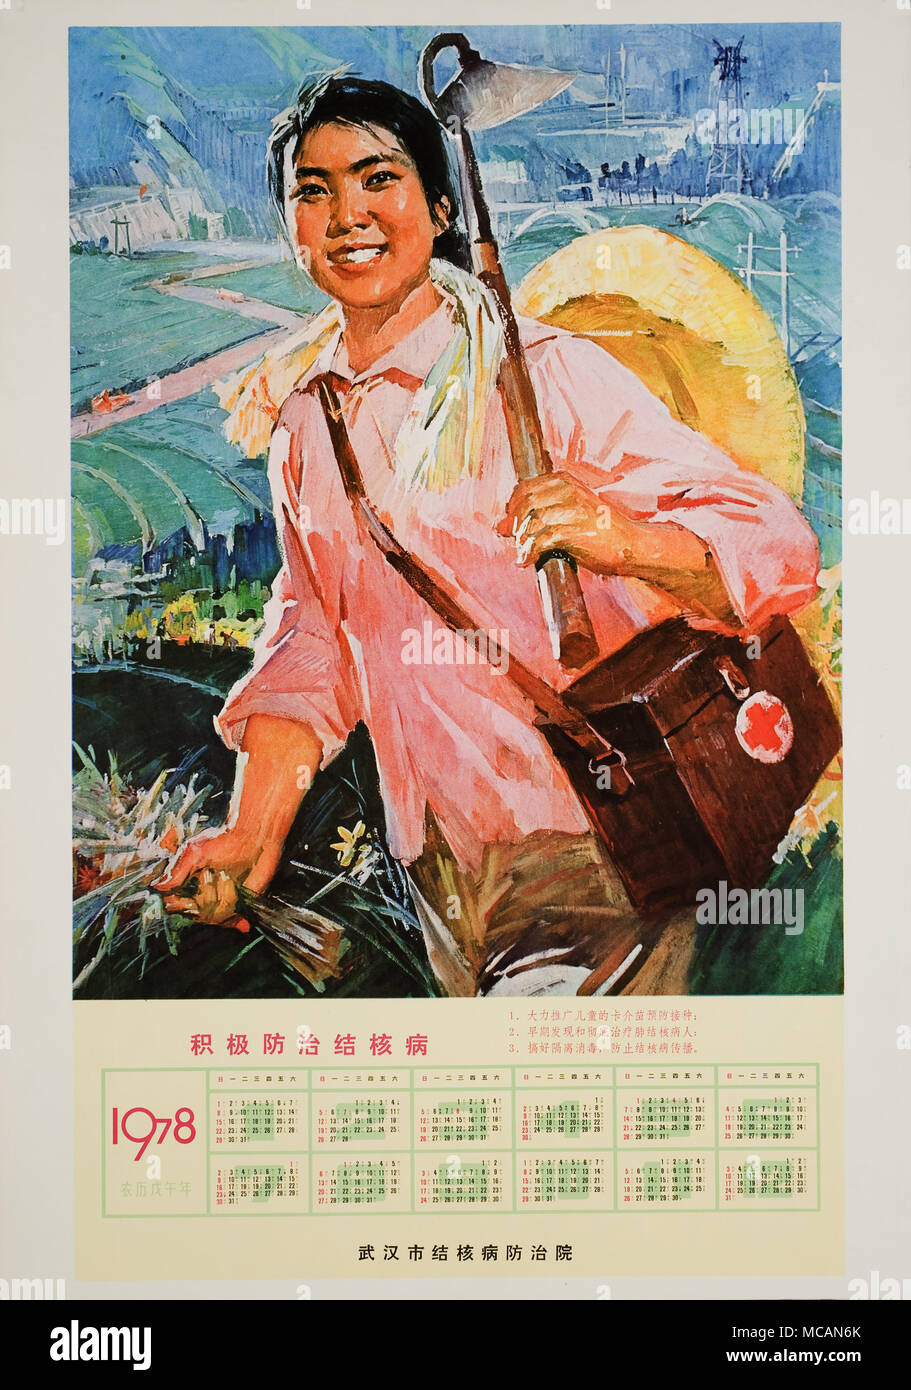 a smiling young girl in a field, in a pink shirt, carrying a hoe and a nurse's bag over her shoulder. The bottom portion of the poster is a calendar for year 1978. Next to the title are three written statements emphasizing the universal use of BCG vaccines for children, early discovery and treatment of TB, and isolation and disinfection as ways of prevention. Stock Photo